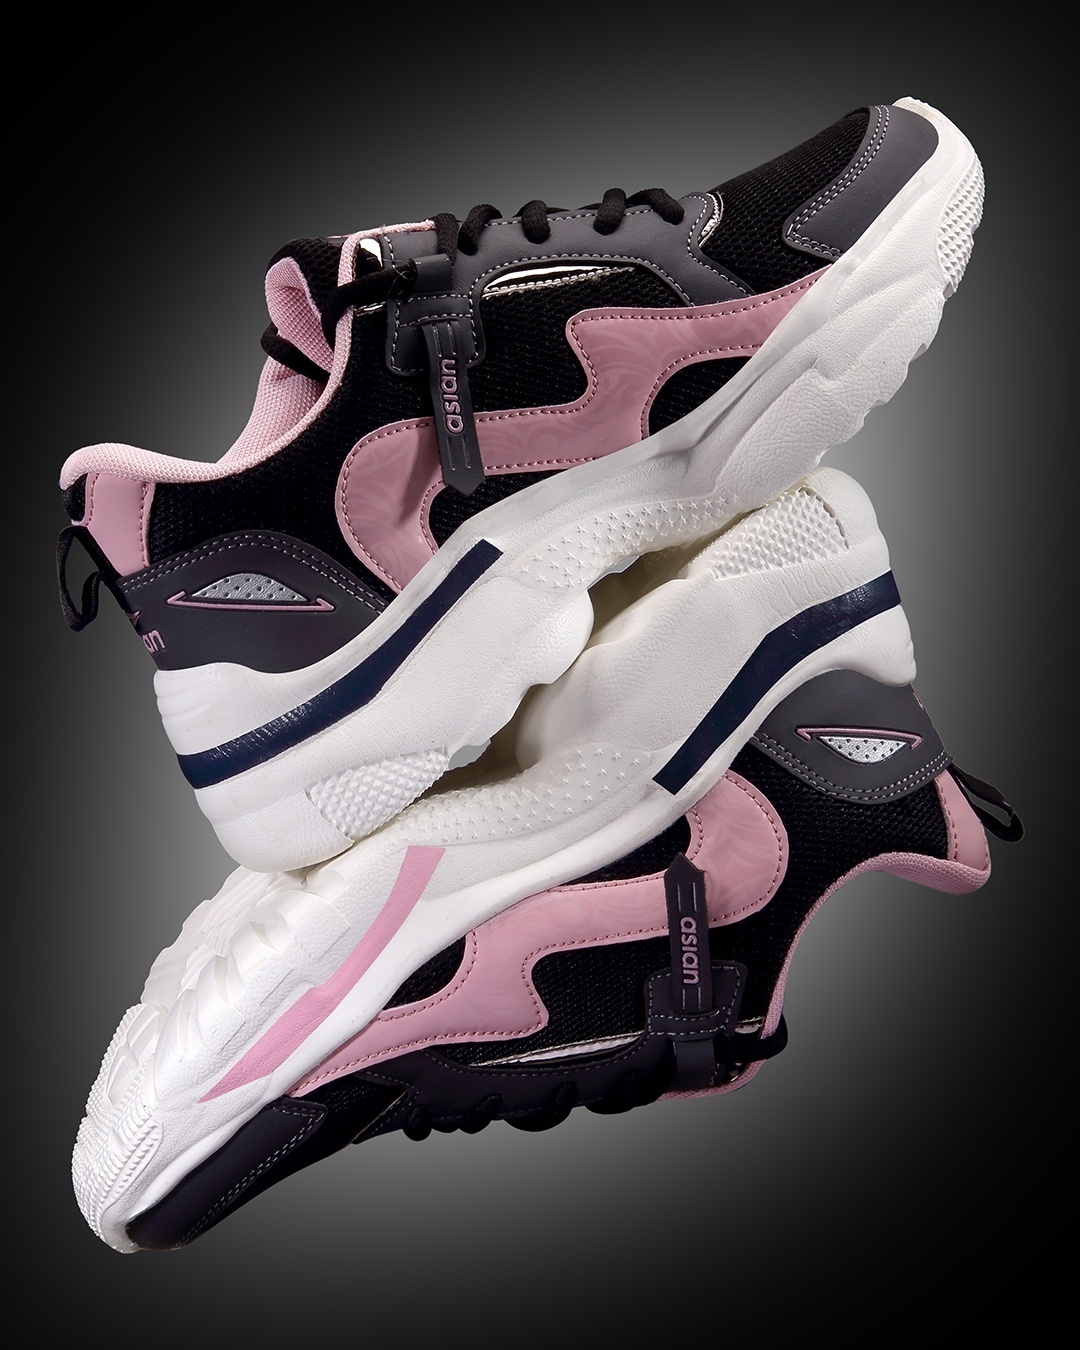 Buy Puma Burst IDP Black & Pink Running Shoes from top Brands at Best  Prices Online in India | Tata CLiQ